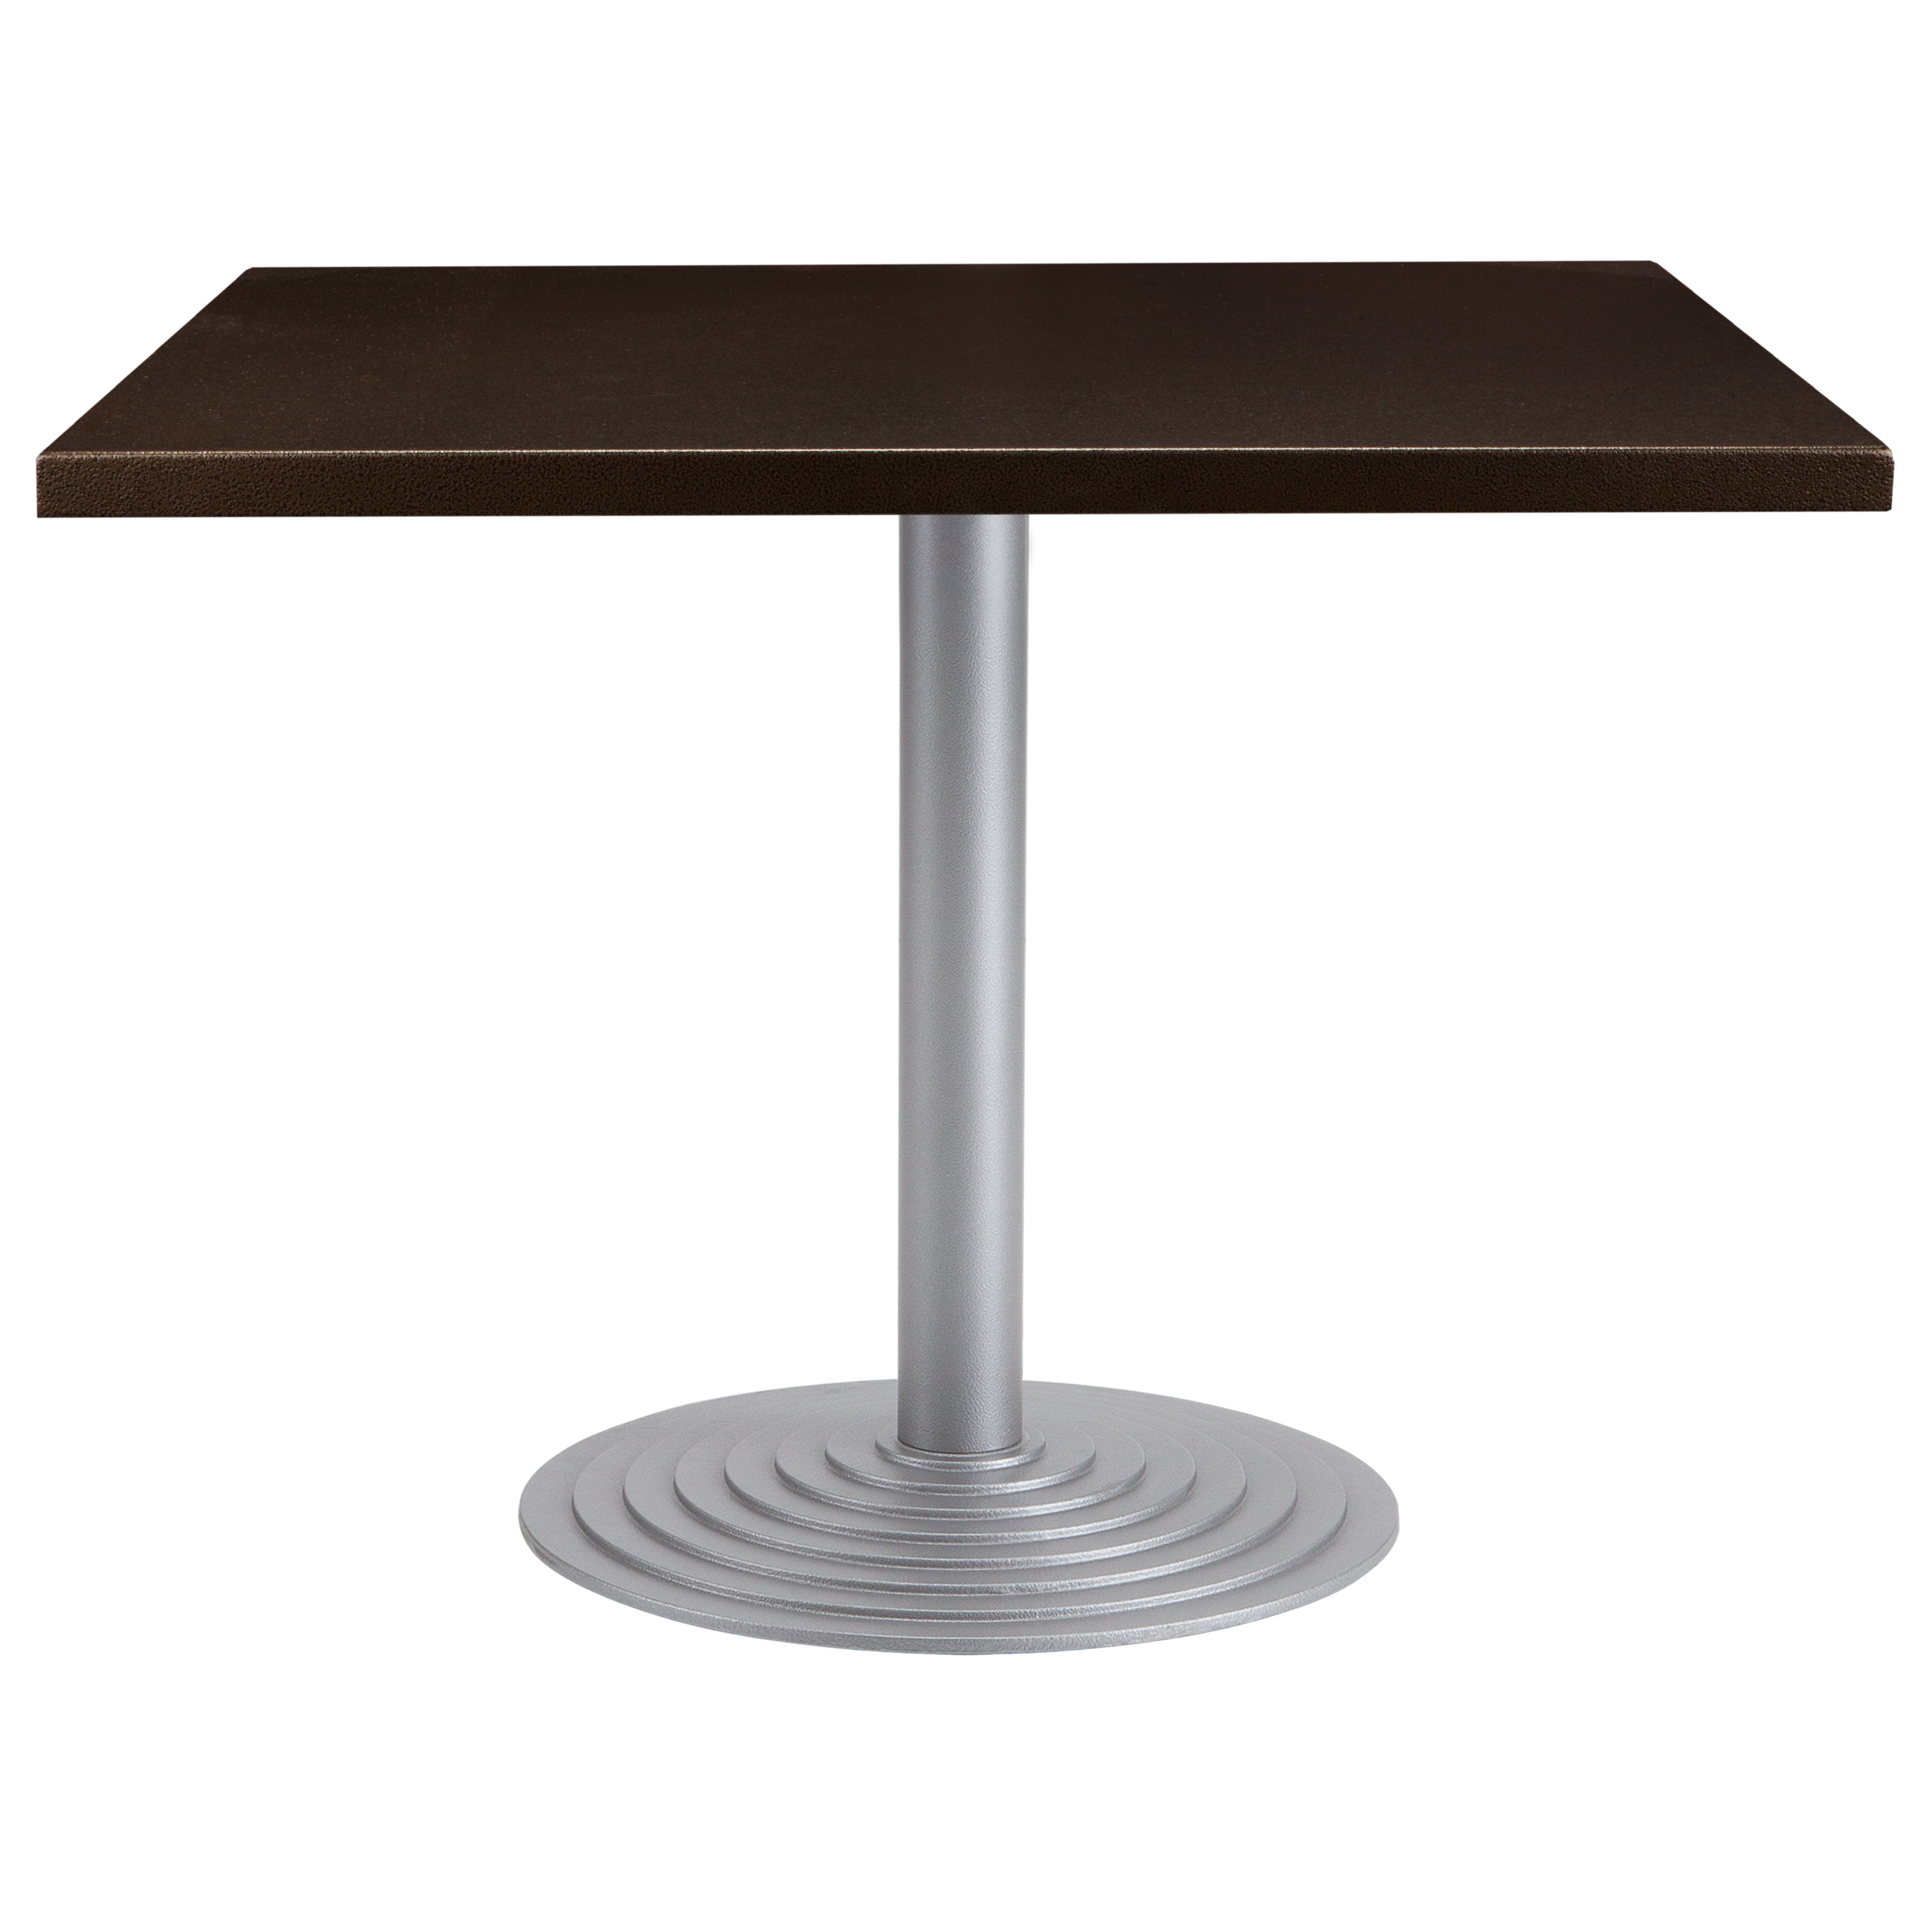 FREEPORT TABLE TOPS
$229.00 – $279.00
CLICK FOR SPEC SHEET
